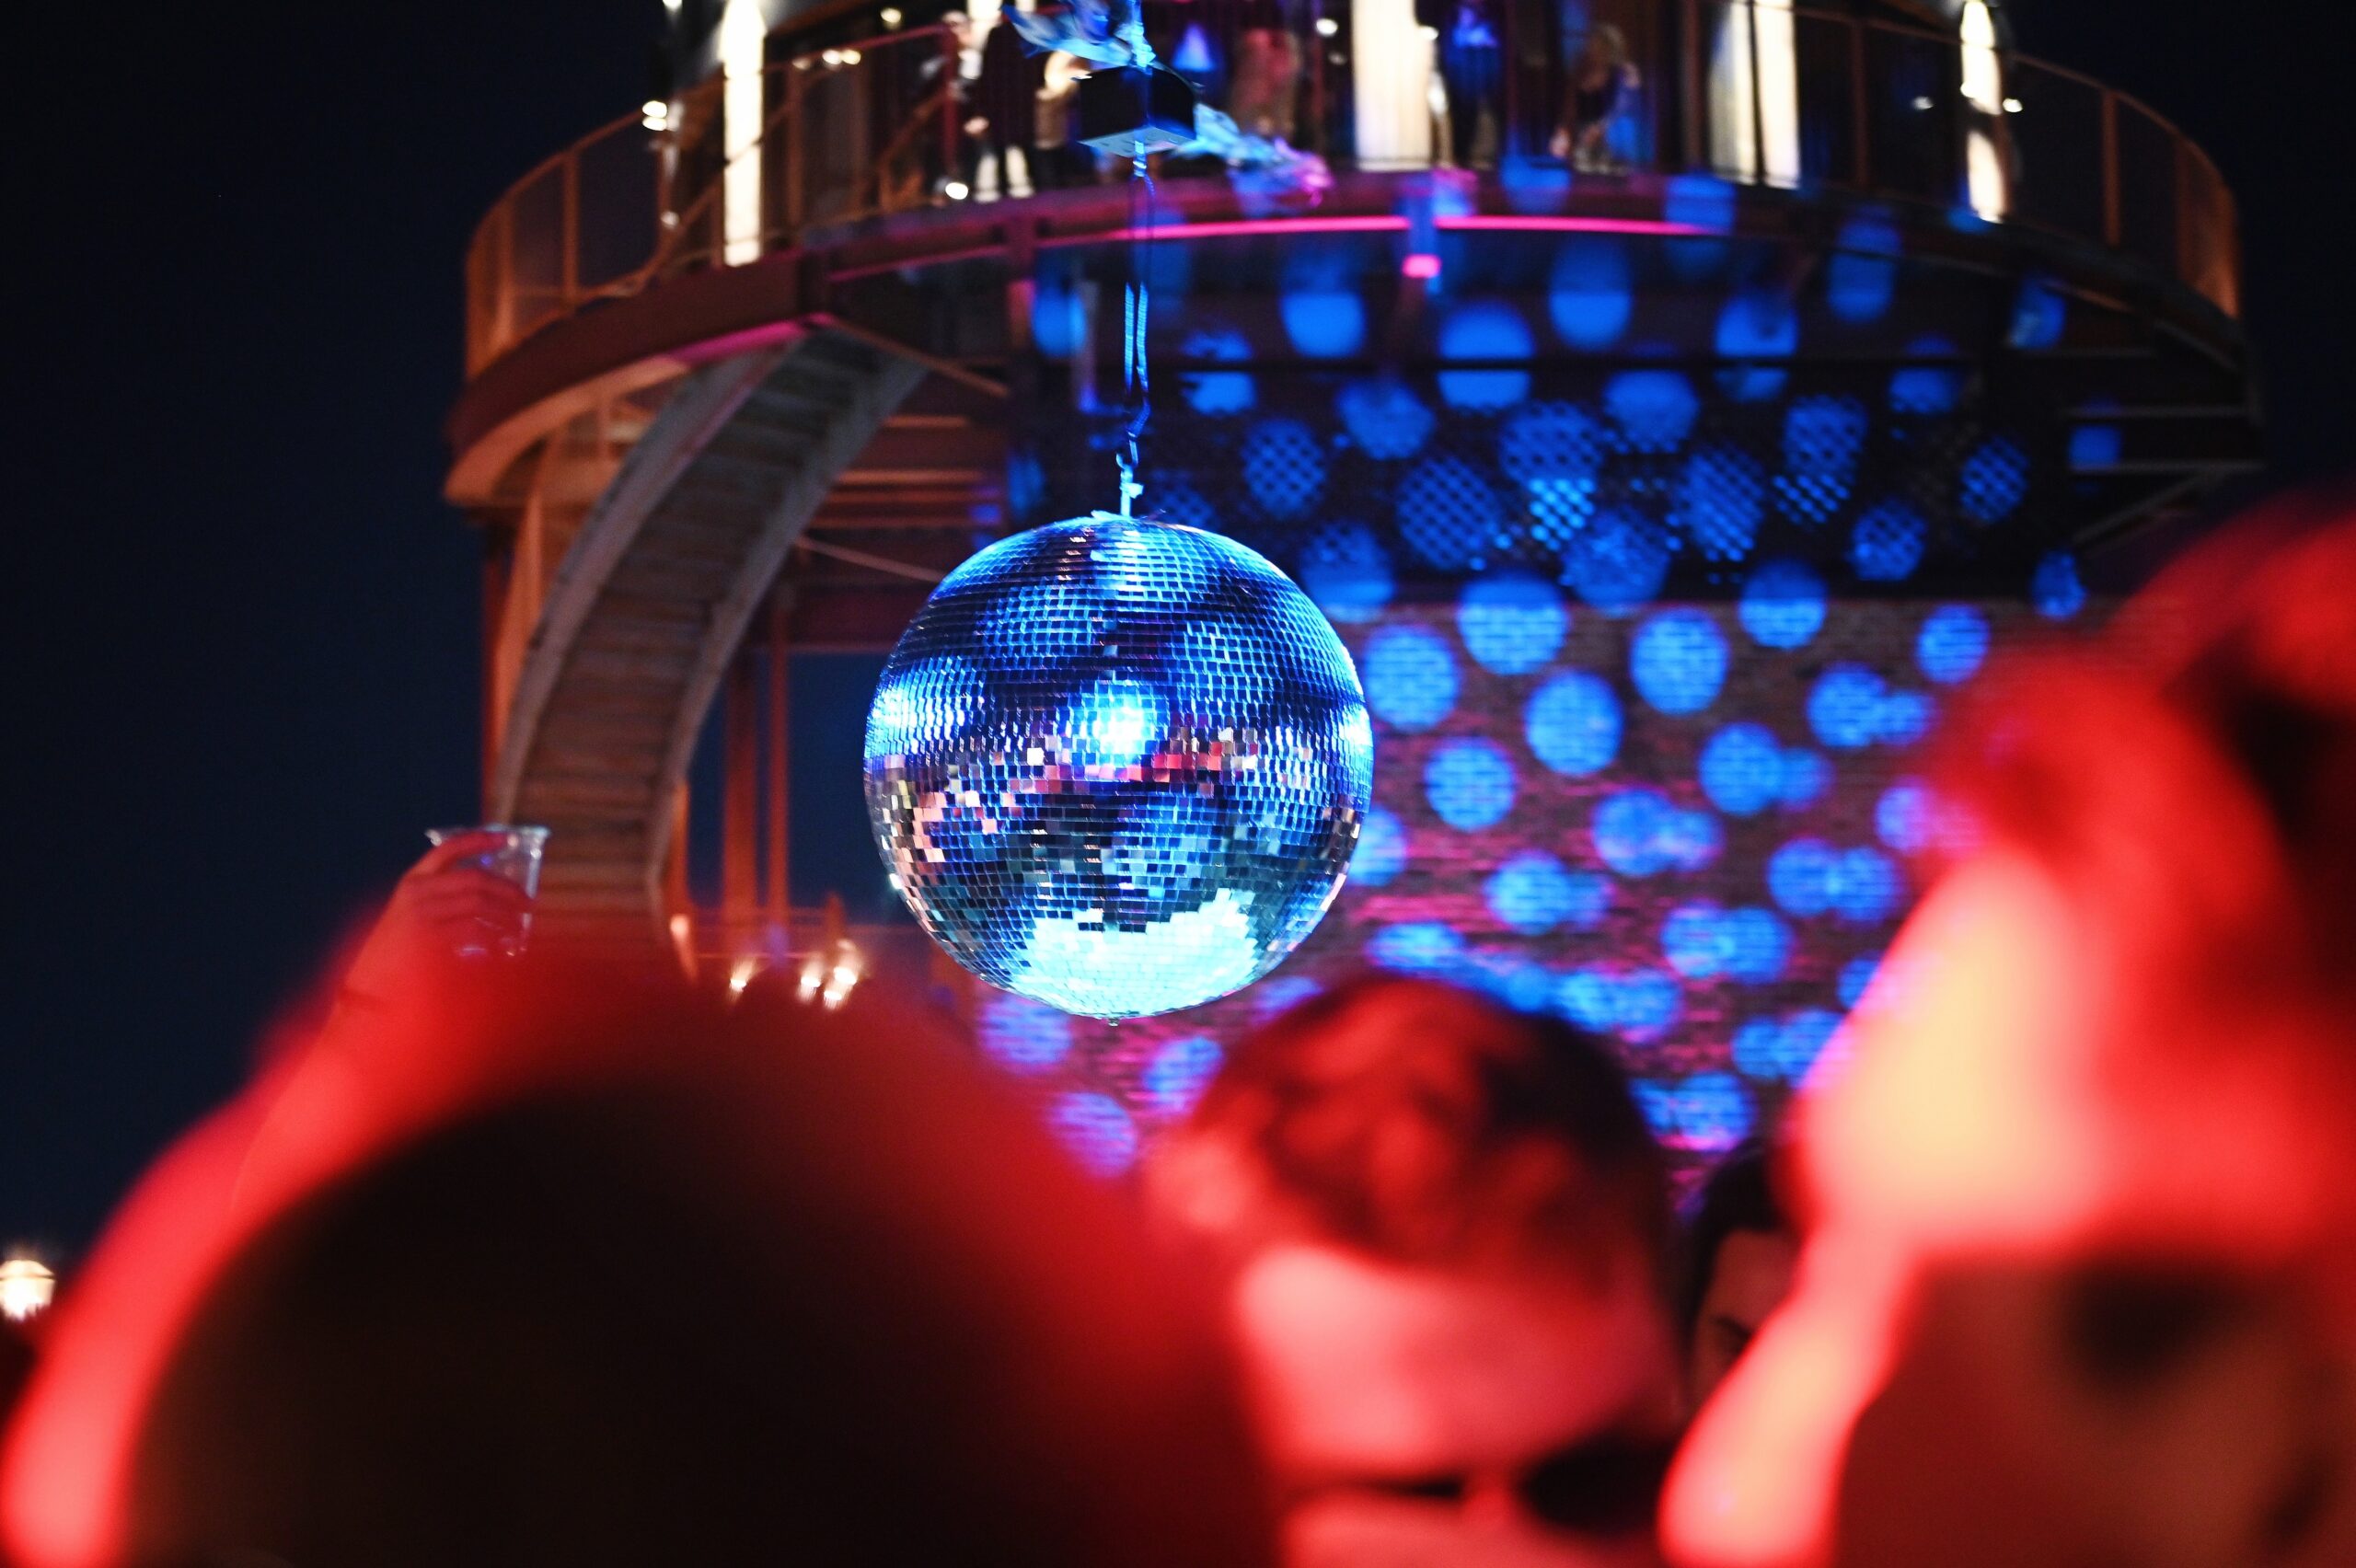 Close-up of a blue disco ball in a dimly lit room with red and blue lights, surrounded by people at a party.